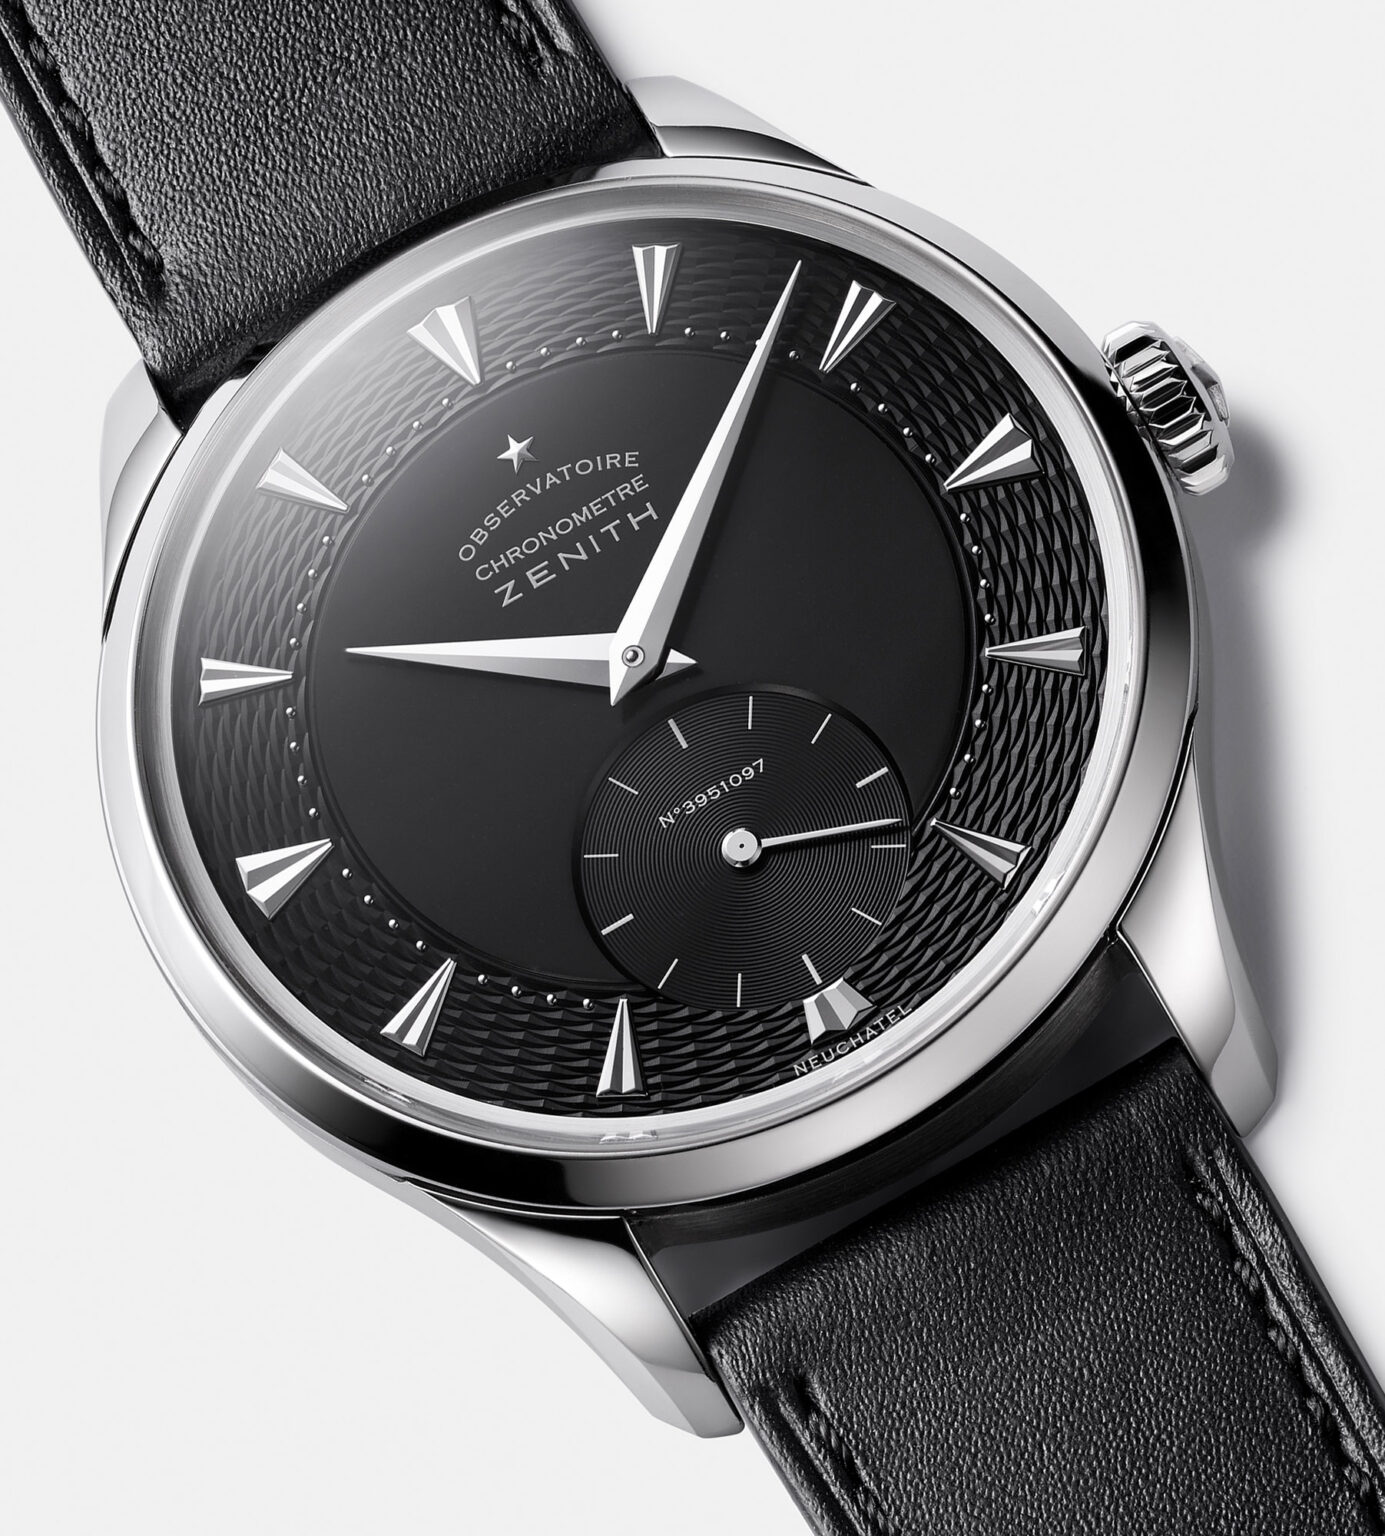 Zenith Debuts Calibre 135 Observatoire Limited-Edition Watch | aBlogtoWatch